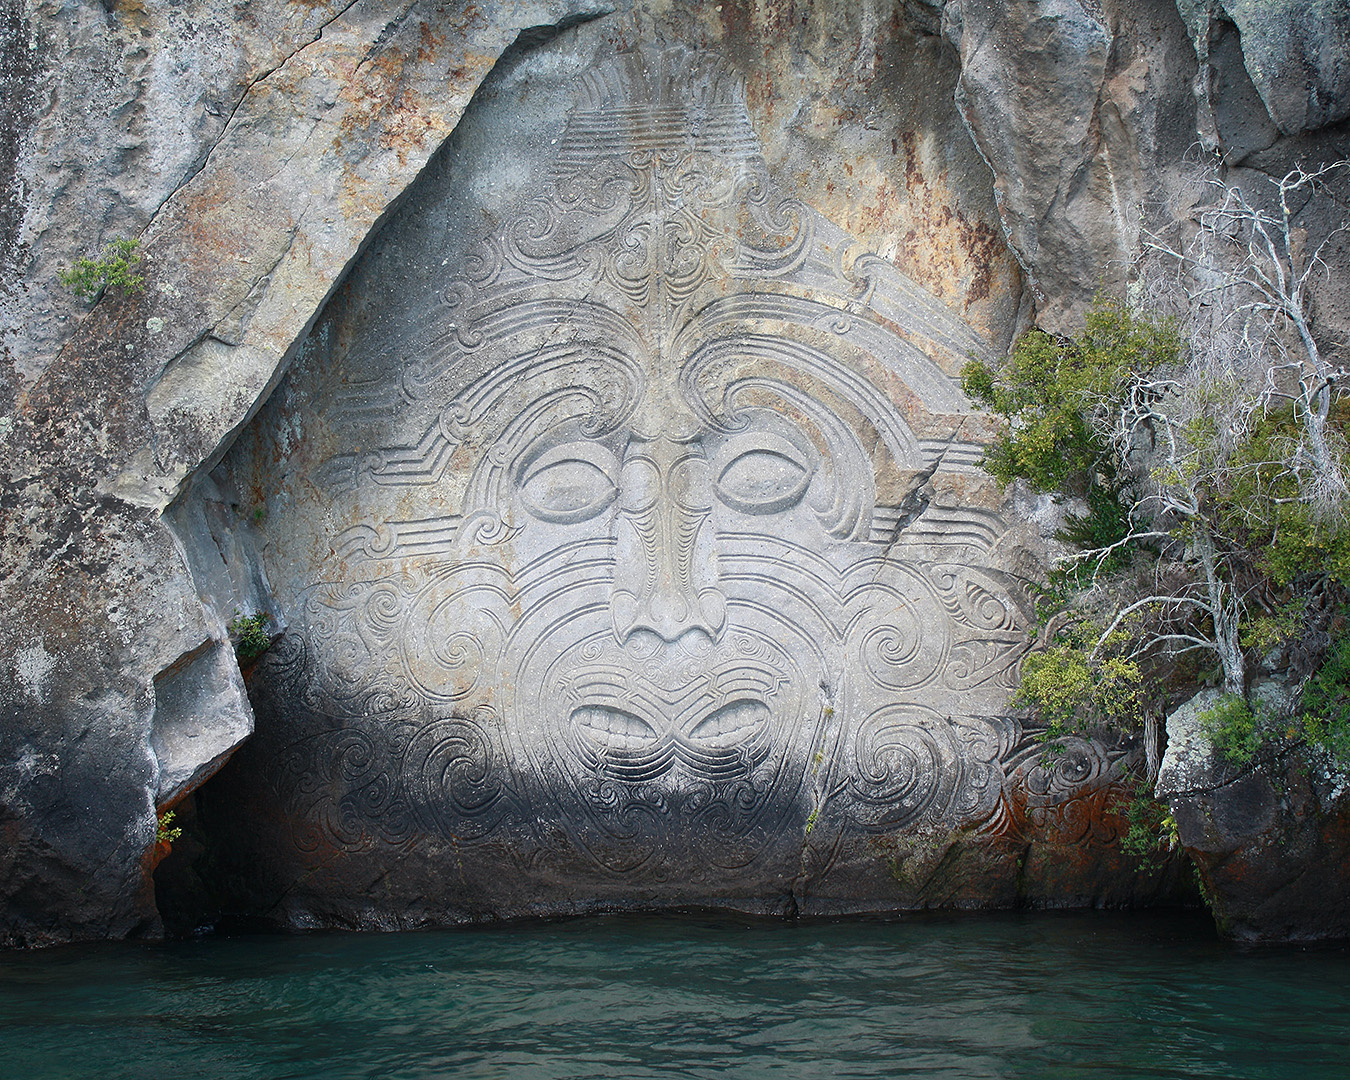 The famous rock carving at Lake Taupo.